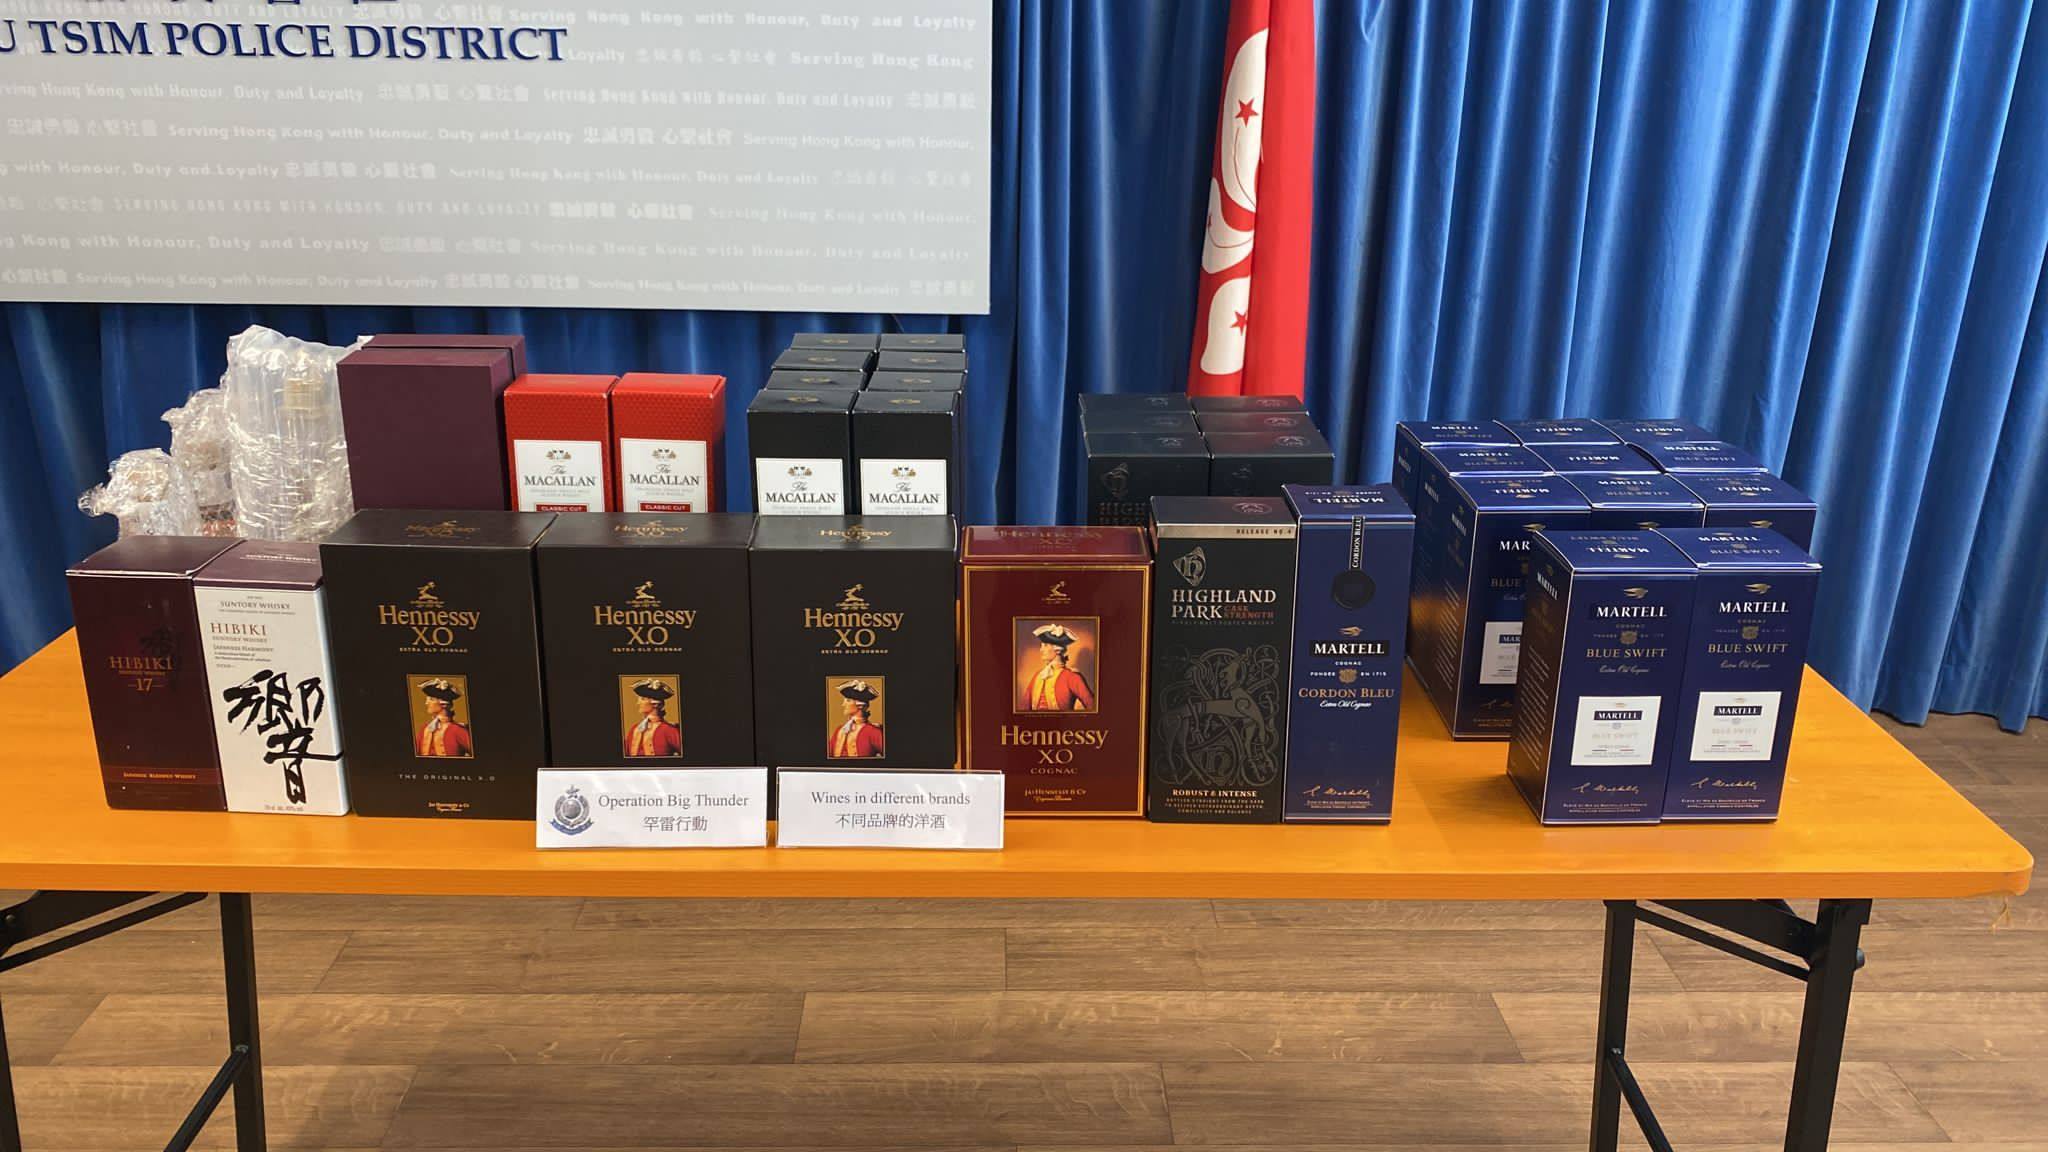 Some of the high-end alcohol seized in Operation Big Thunder, a police sting targeting aircraft credit card thefts. Photo: Handout